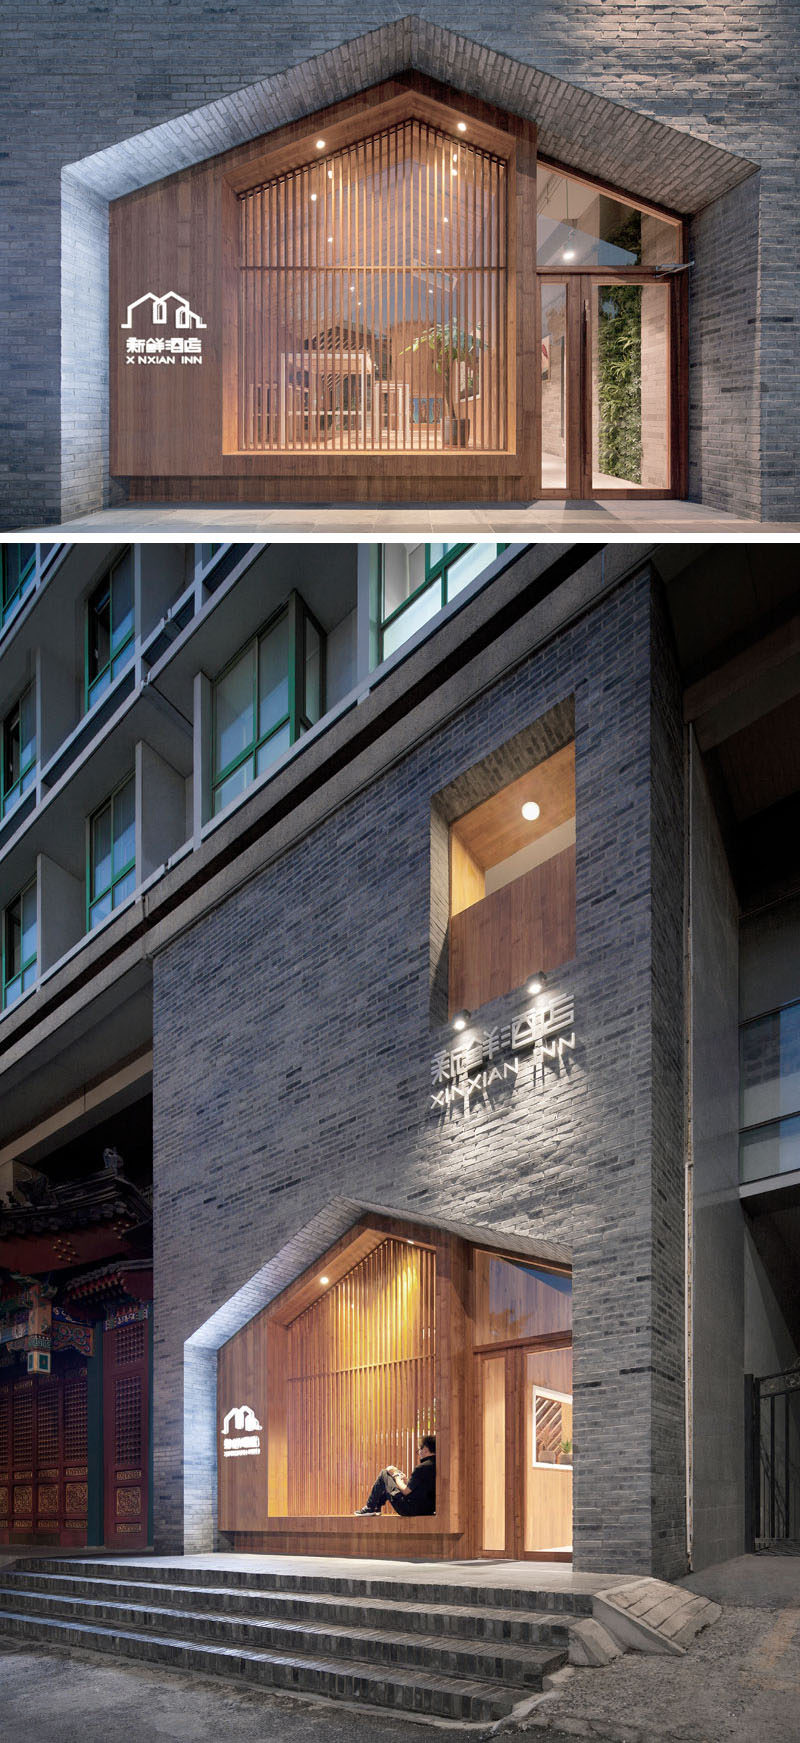 The facade of this modern hotel is a visible icon on the street and it mirrors the surrounding Hutong area with its grey bricks, wood, and glass. #ModernHotel #Bricks #Wood #HotelDesign